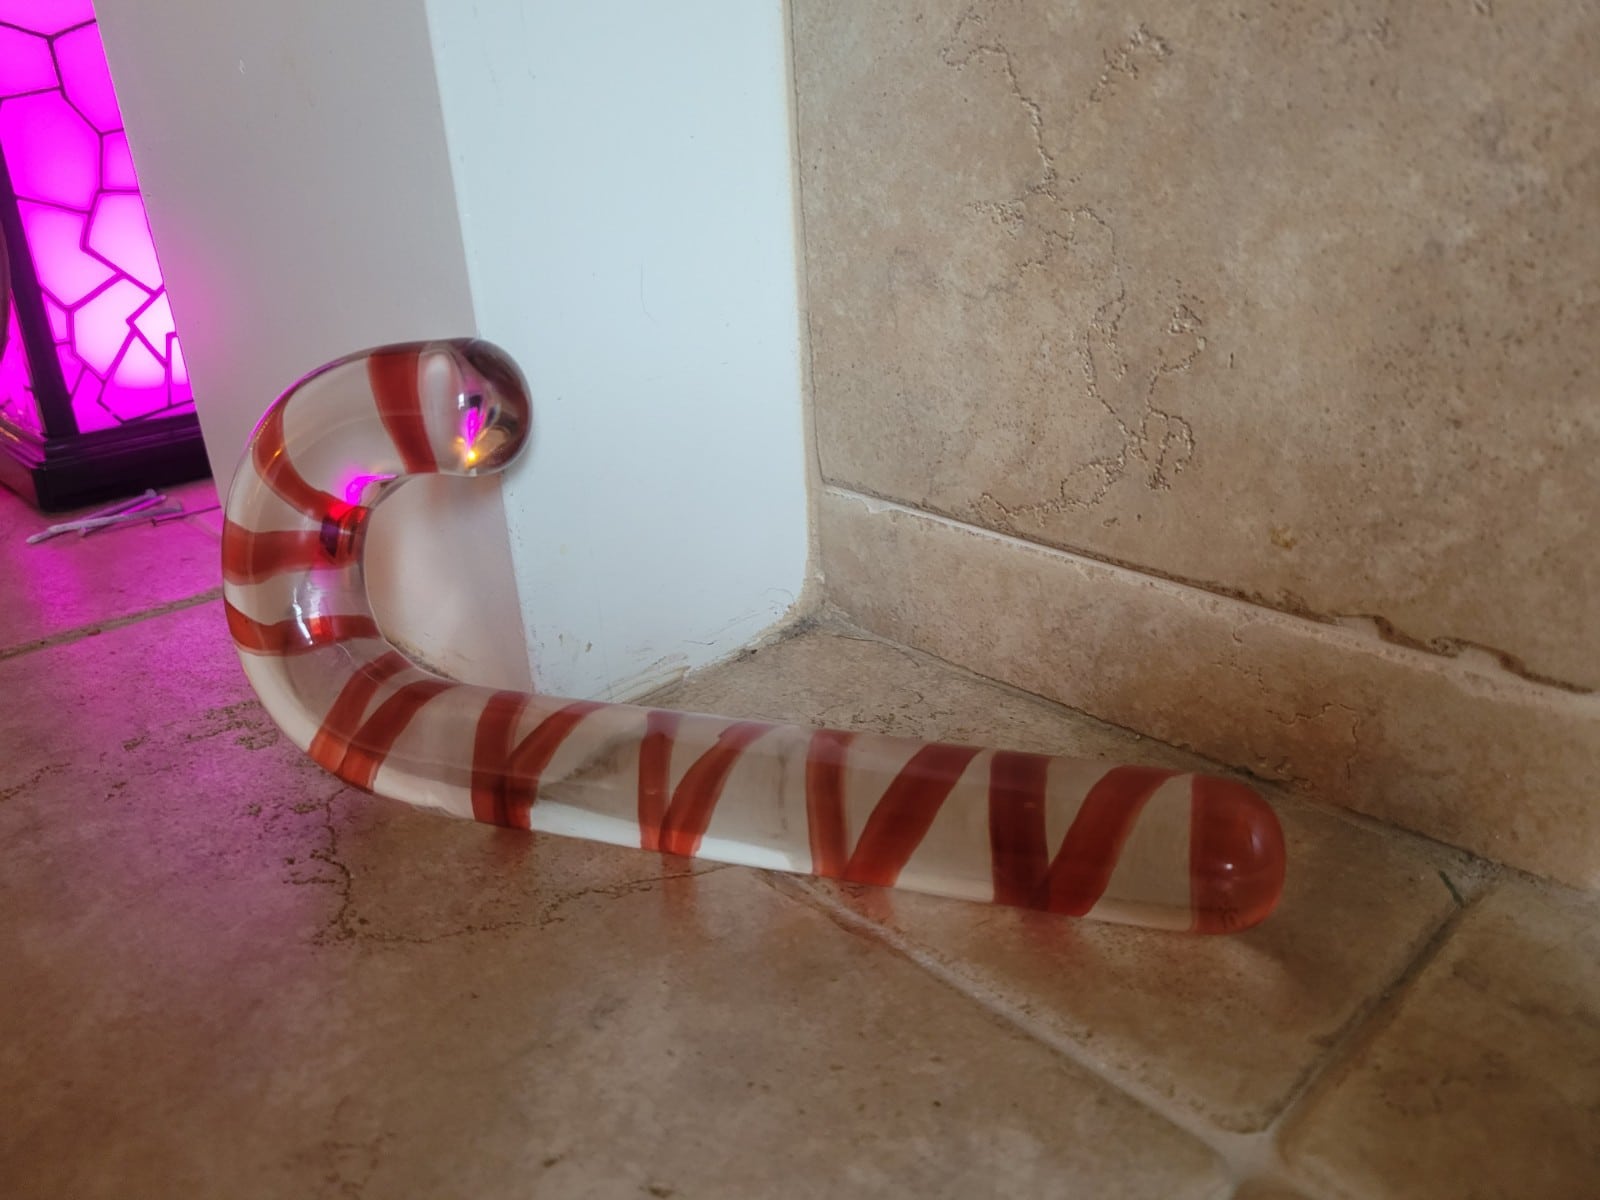 Icicles No. 59 Candy Cane Dildo Standout Quality or Shortcomings?